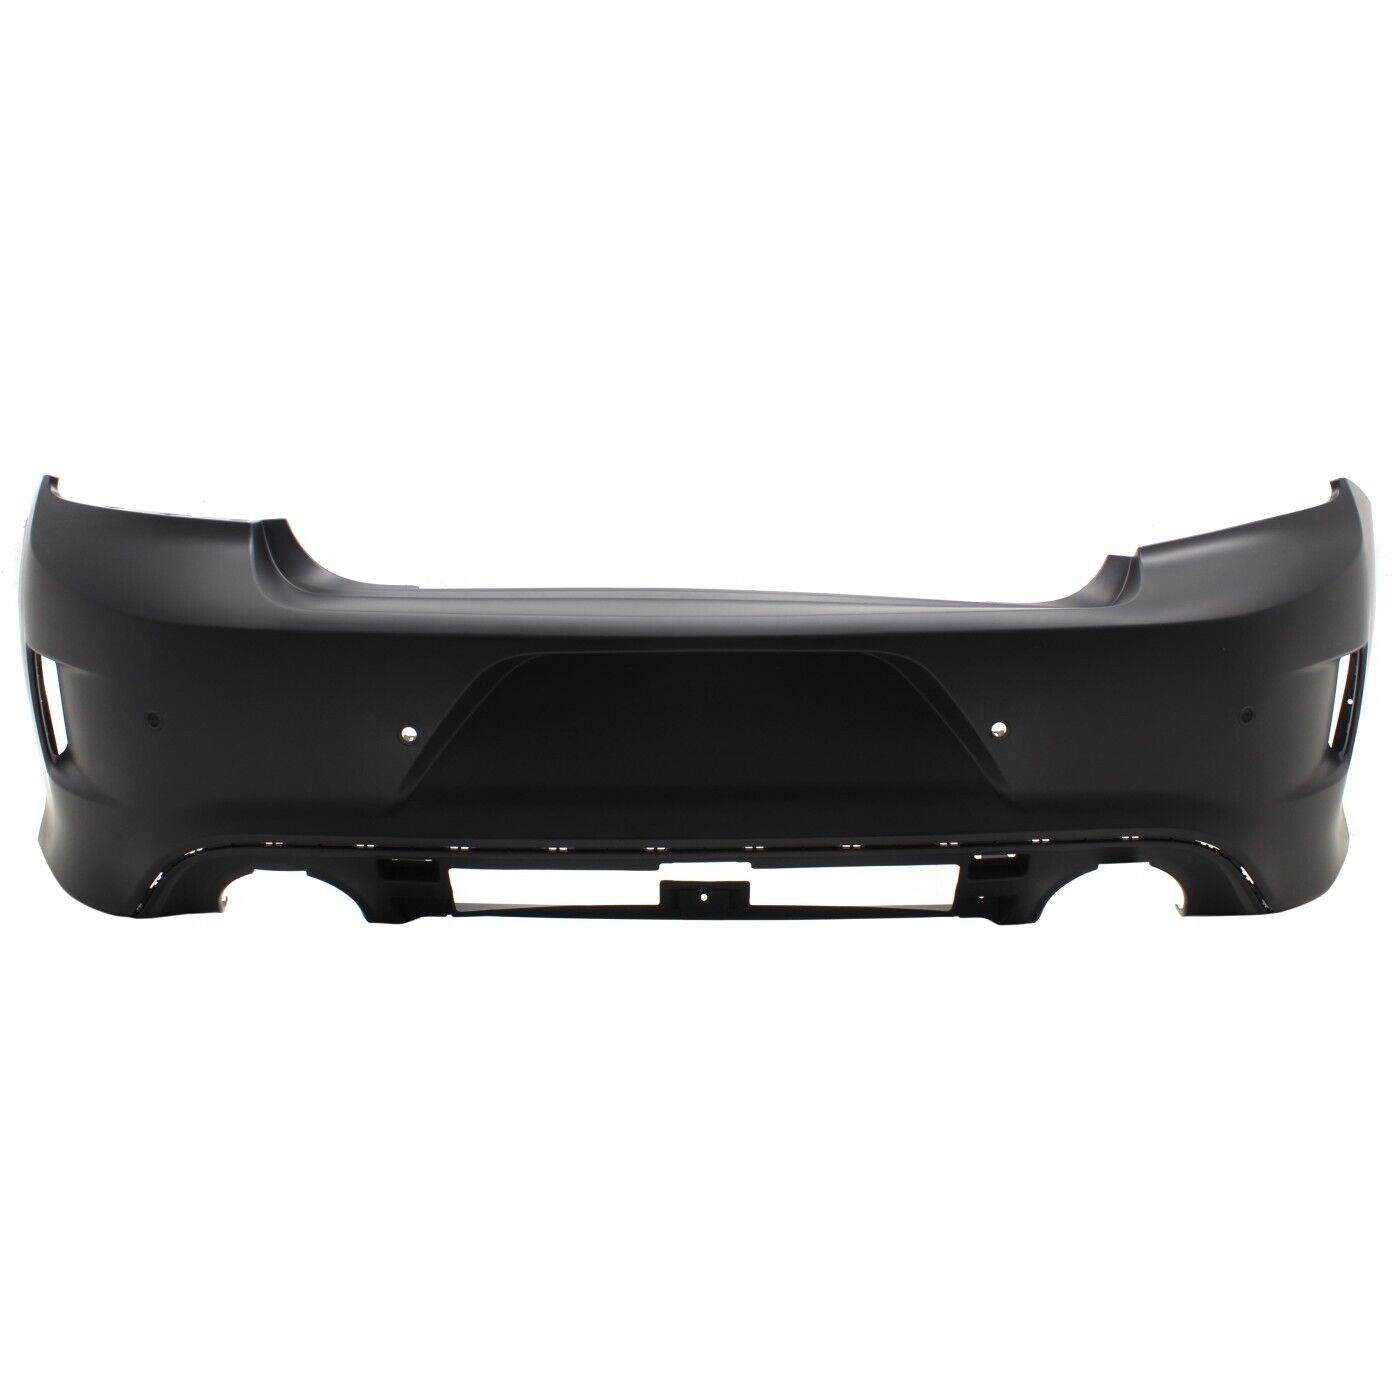 CAPA Bumper Cover Fascia Rear for Dodge Charger 2015-2017 CH1100A10 5PP50TZZAD